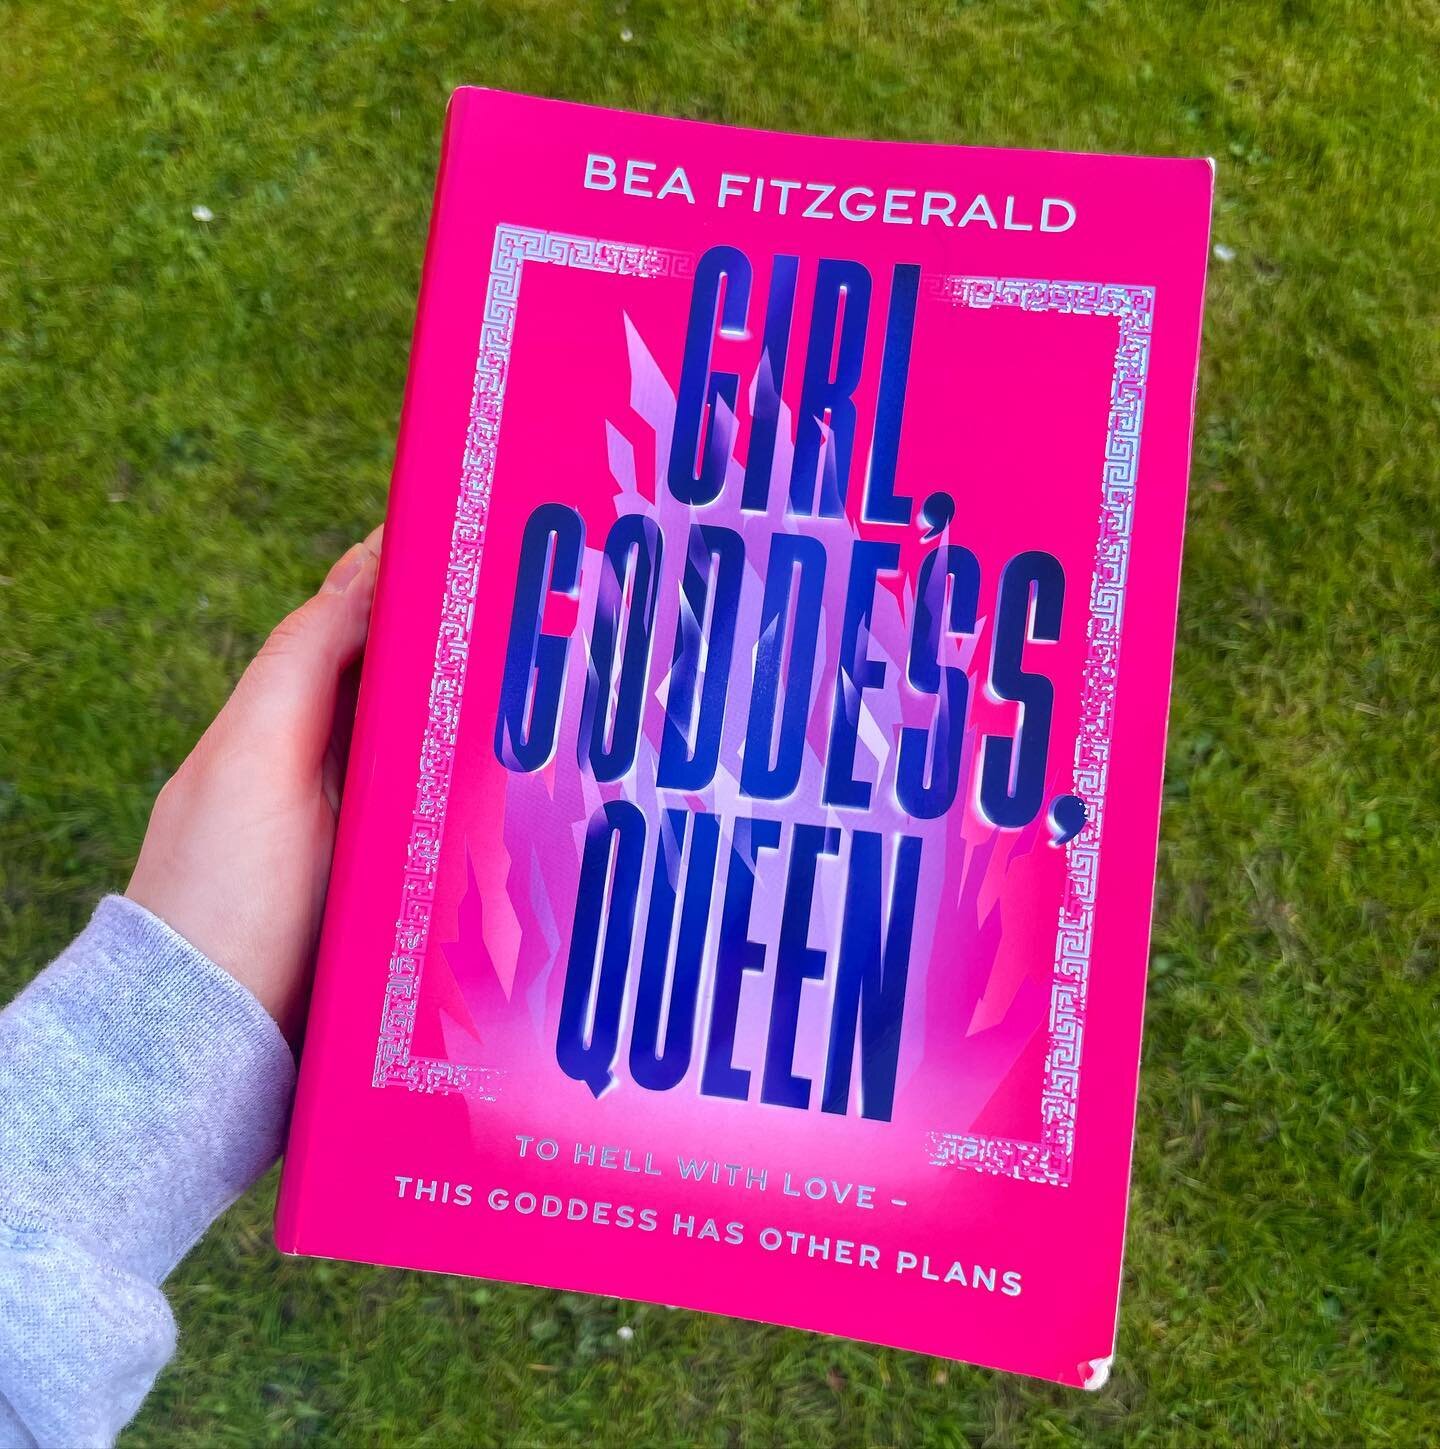 If you&rsquo;re looking for a fab summer read LOOK NO FURTHER. Girl, Goddess, Queen by Bea Fitzgerald is an addictively fun YA romcom with a huge heart. 
&bull;
I really enjoyed how Bea reimagined Persephone&rsquo;s myth within a romcom setting (this